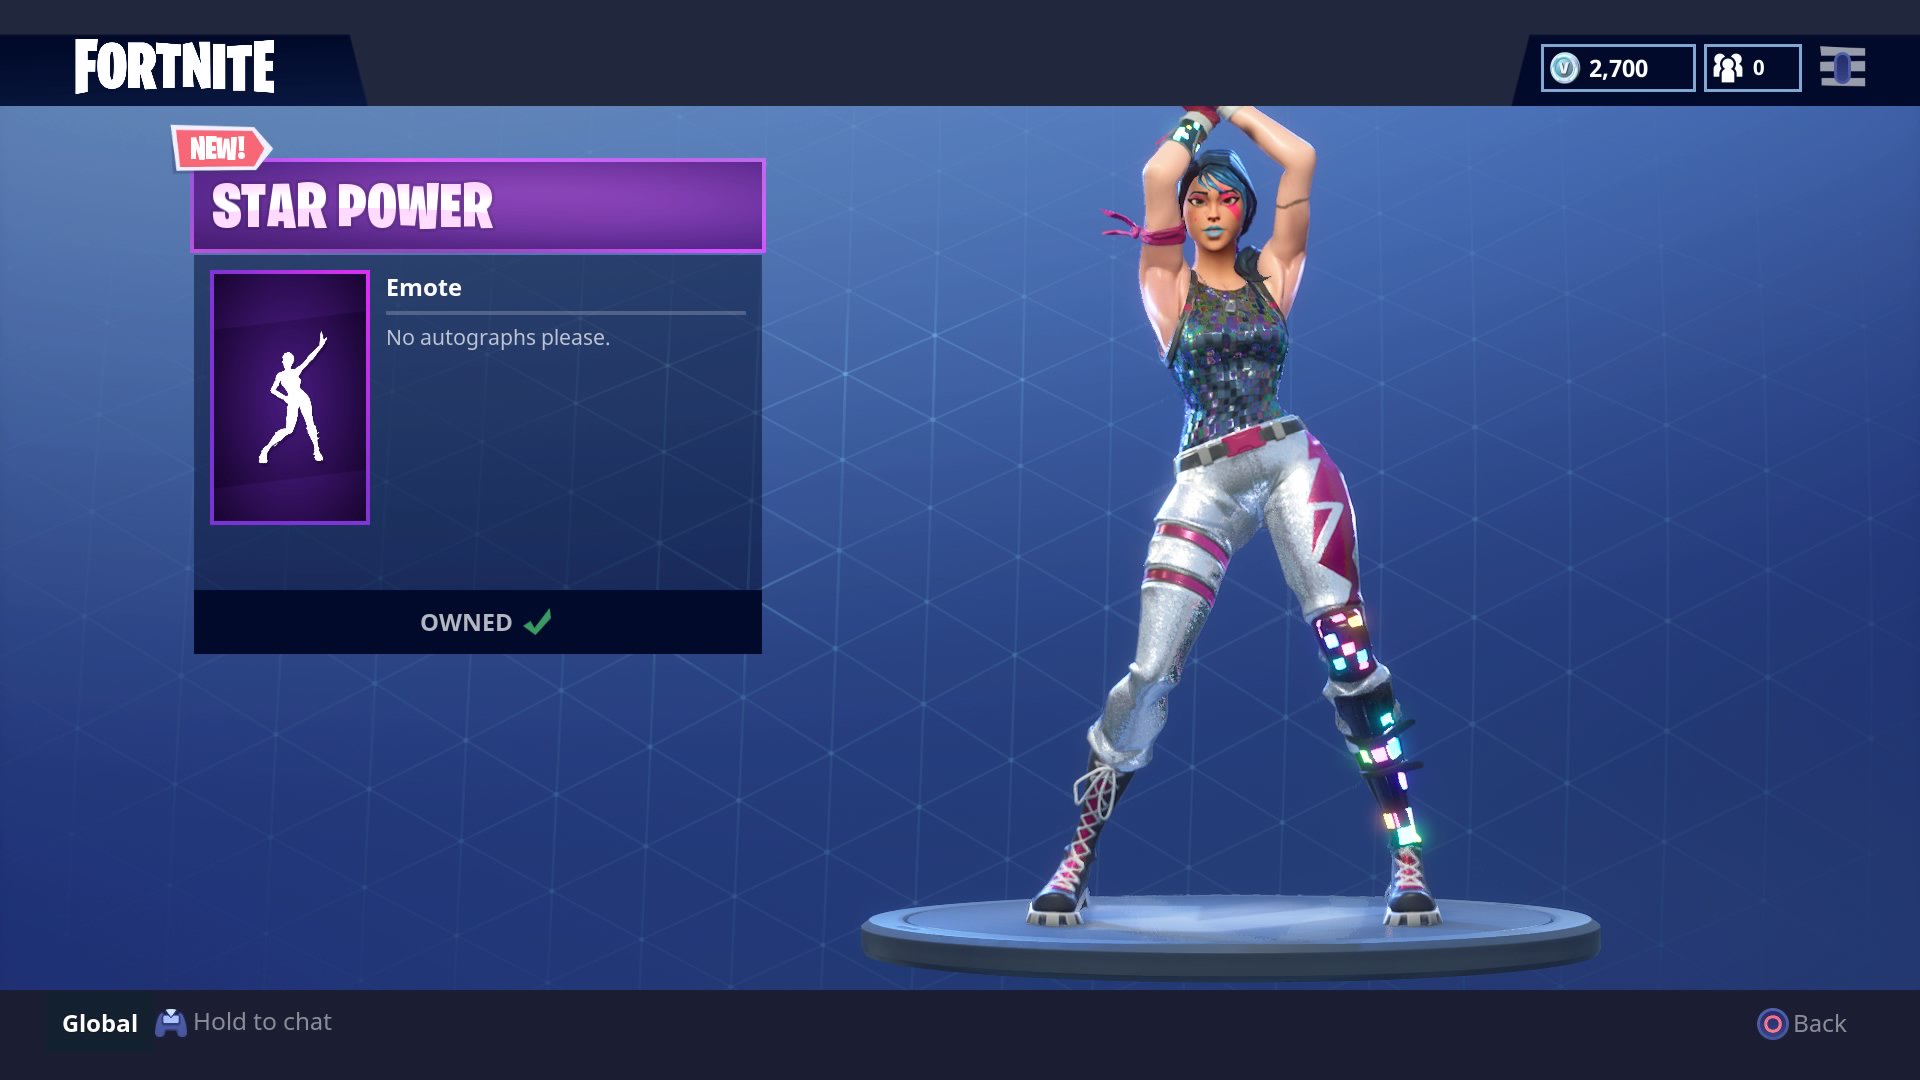 Fortnite Star Power Dance Emote Now Available in the Store - 1920 x 1080 jpeg 128kB